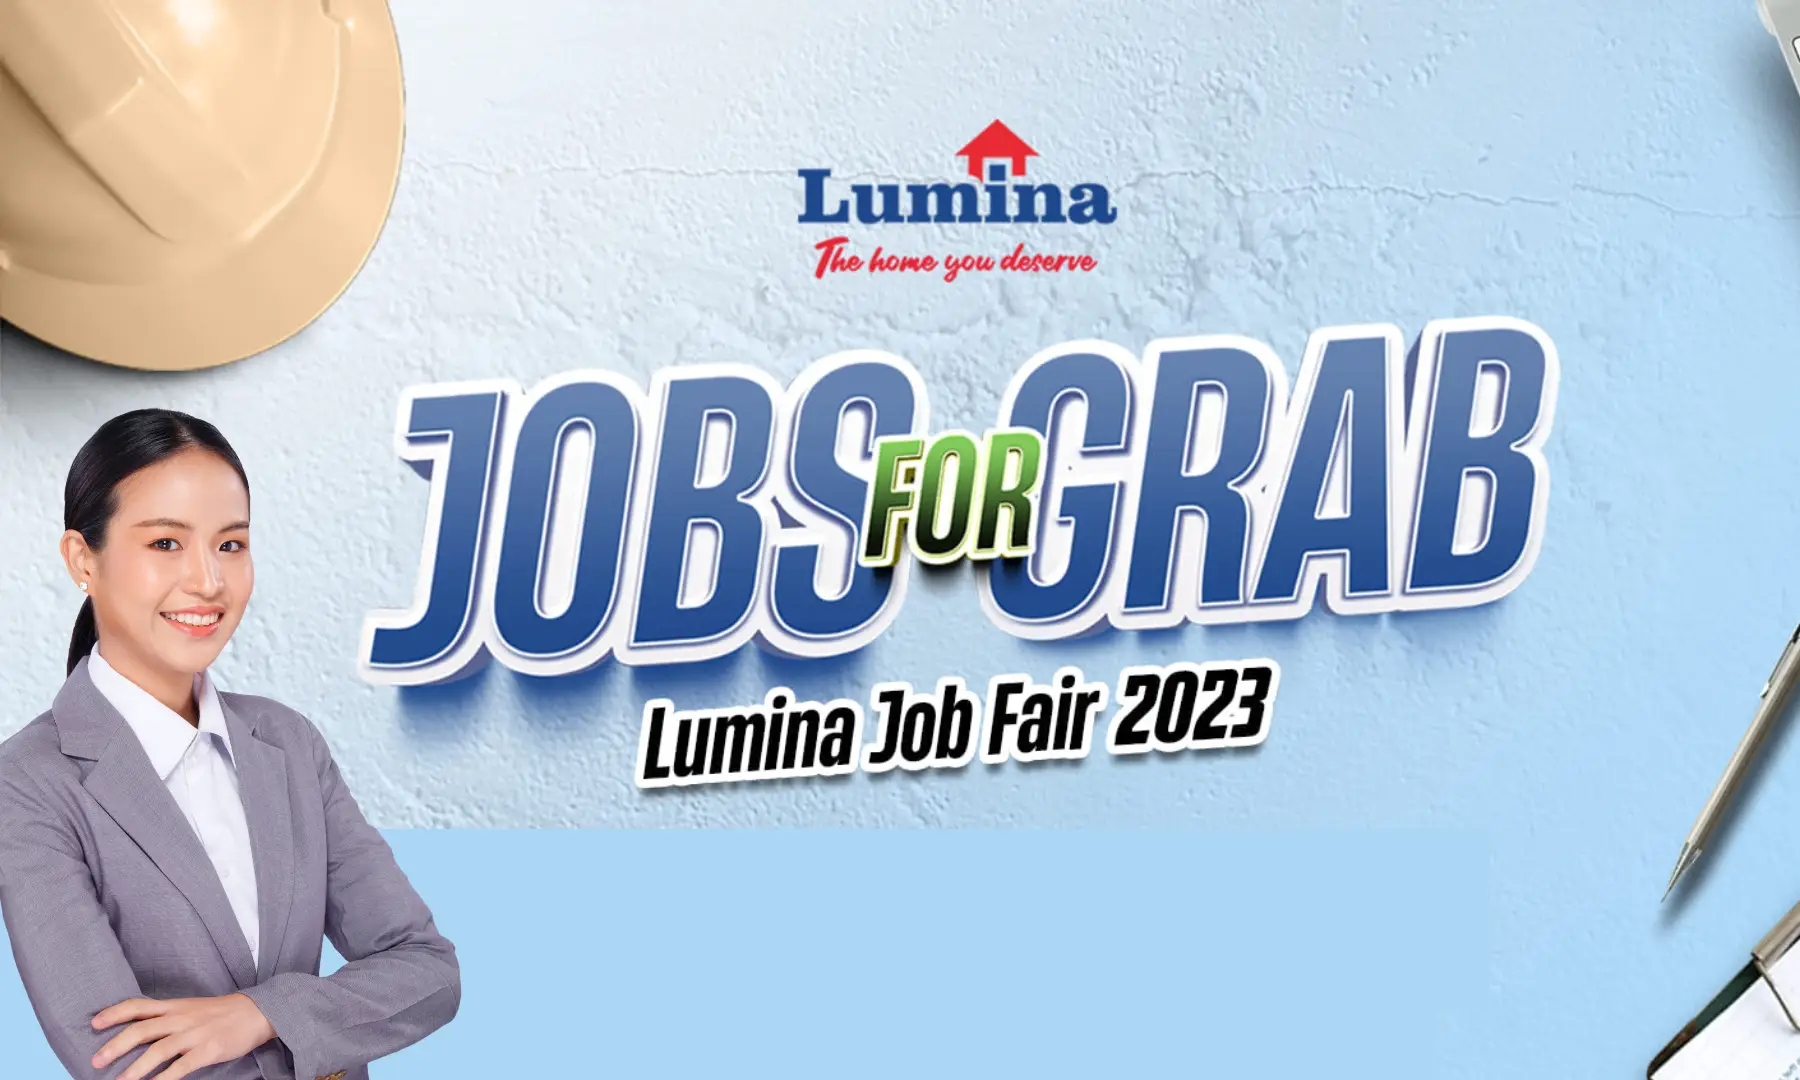 What to Expect in Lumina Job Fair 2023